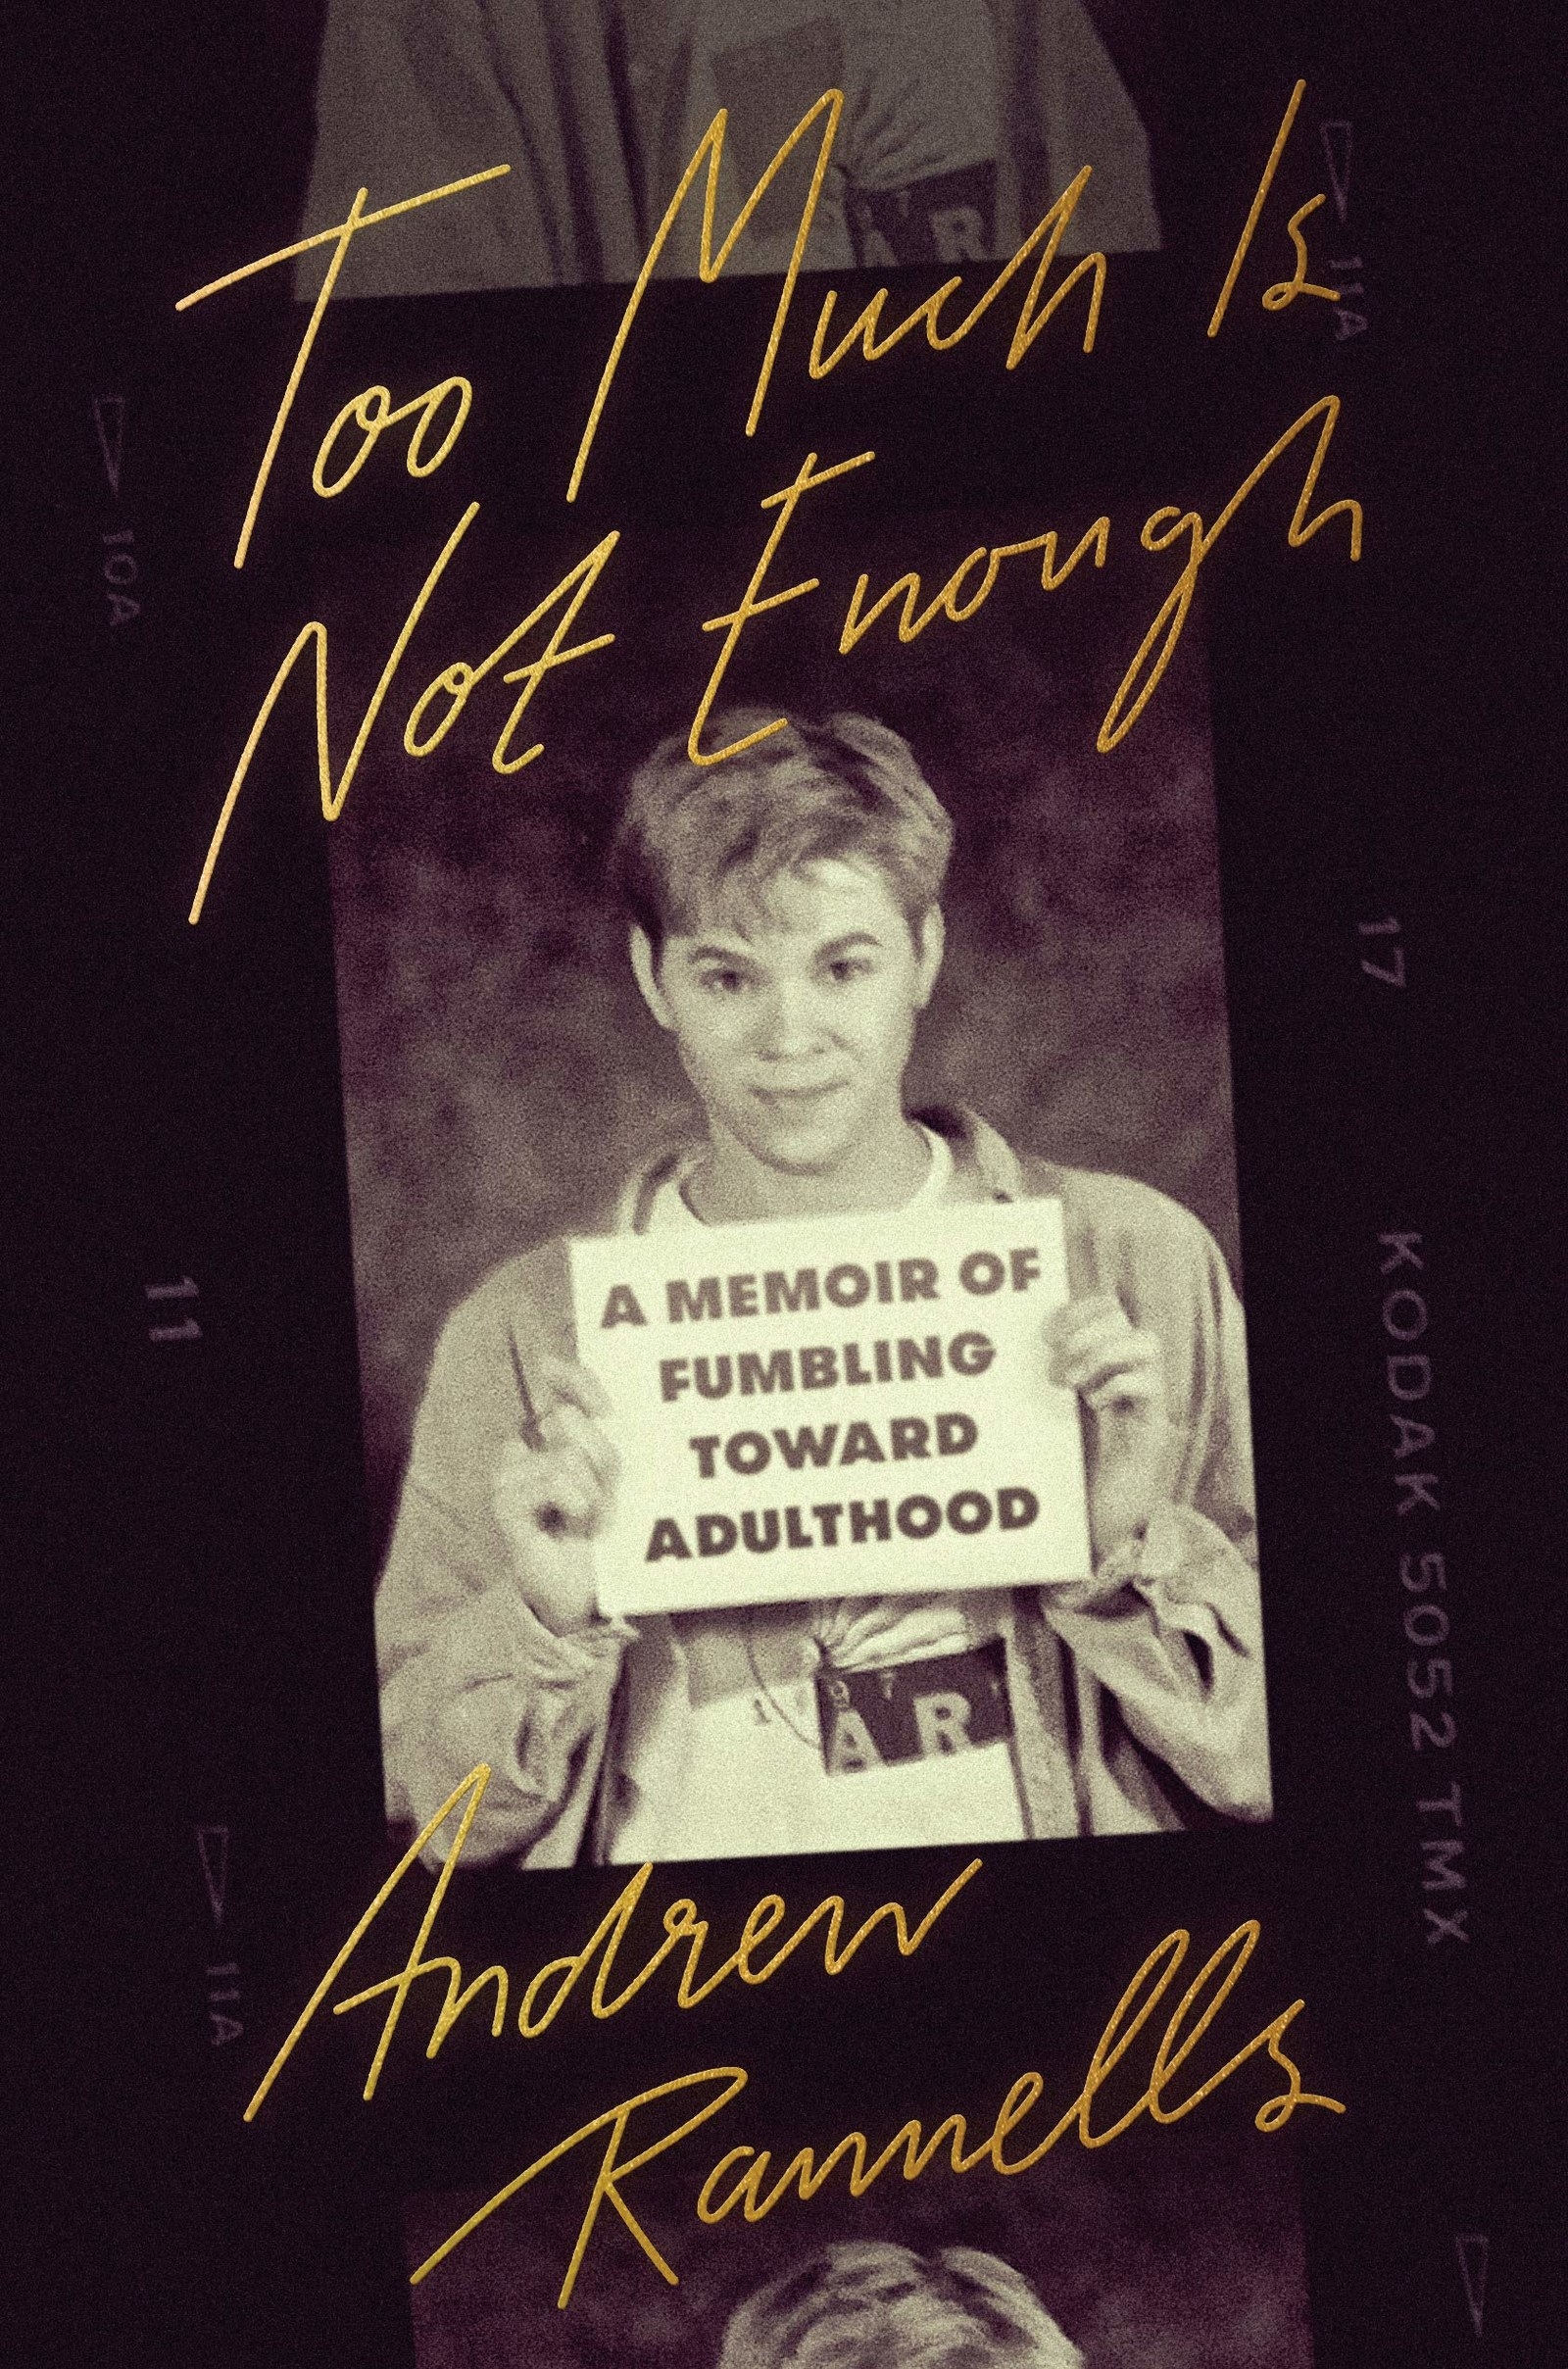 The cover of the book with pictures of Andrew Rannells and the title in gold